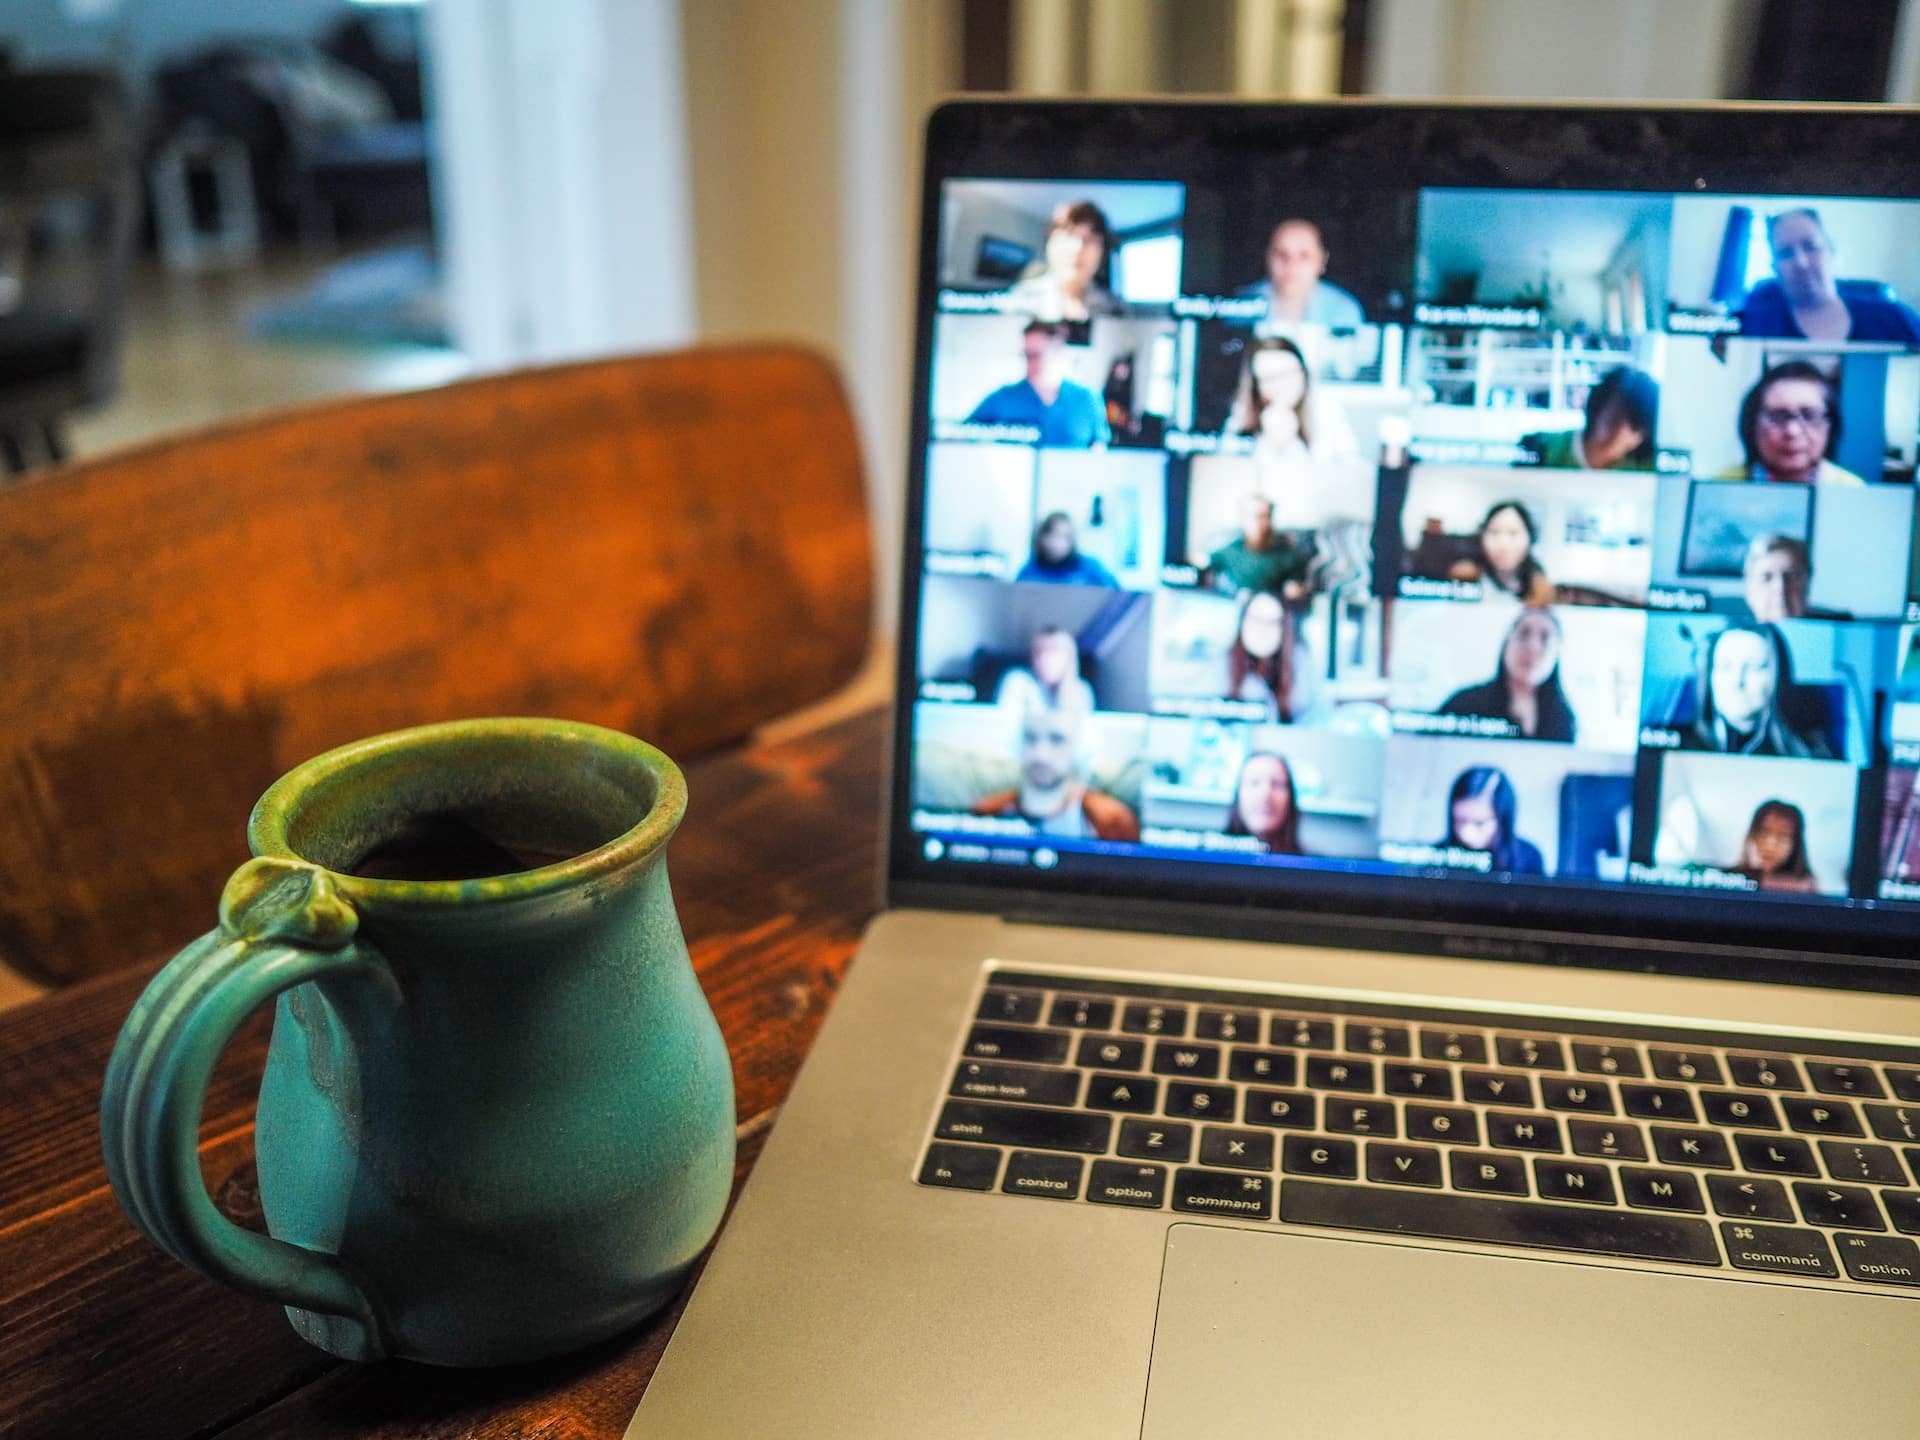 remote working online meeting - chris montgomery smgTvepind4 unsplash - Your People Partners